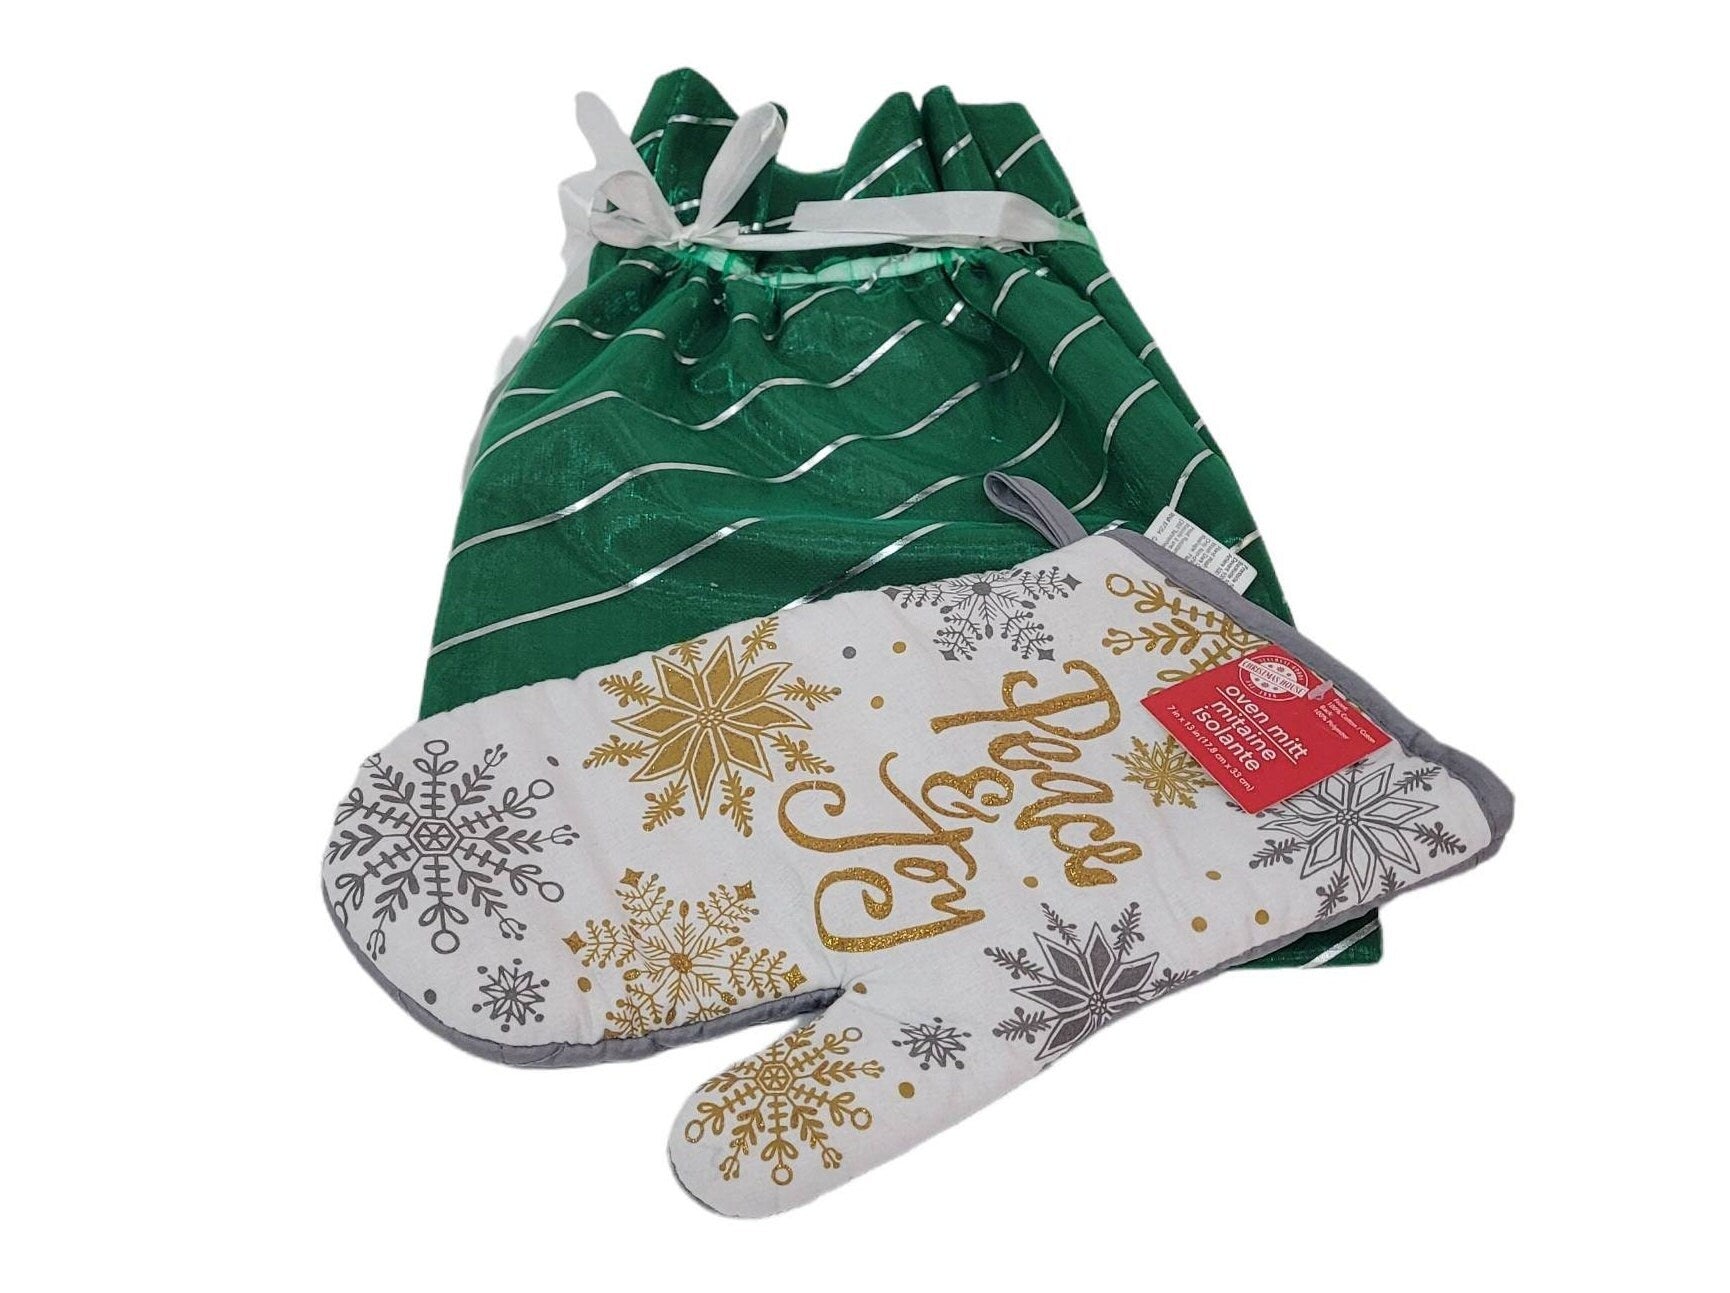 holiday gift oven mitt "peace and joy" with gift bag kitchen accessories